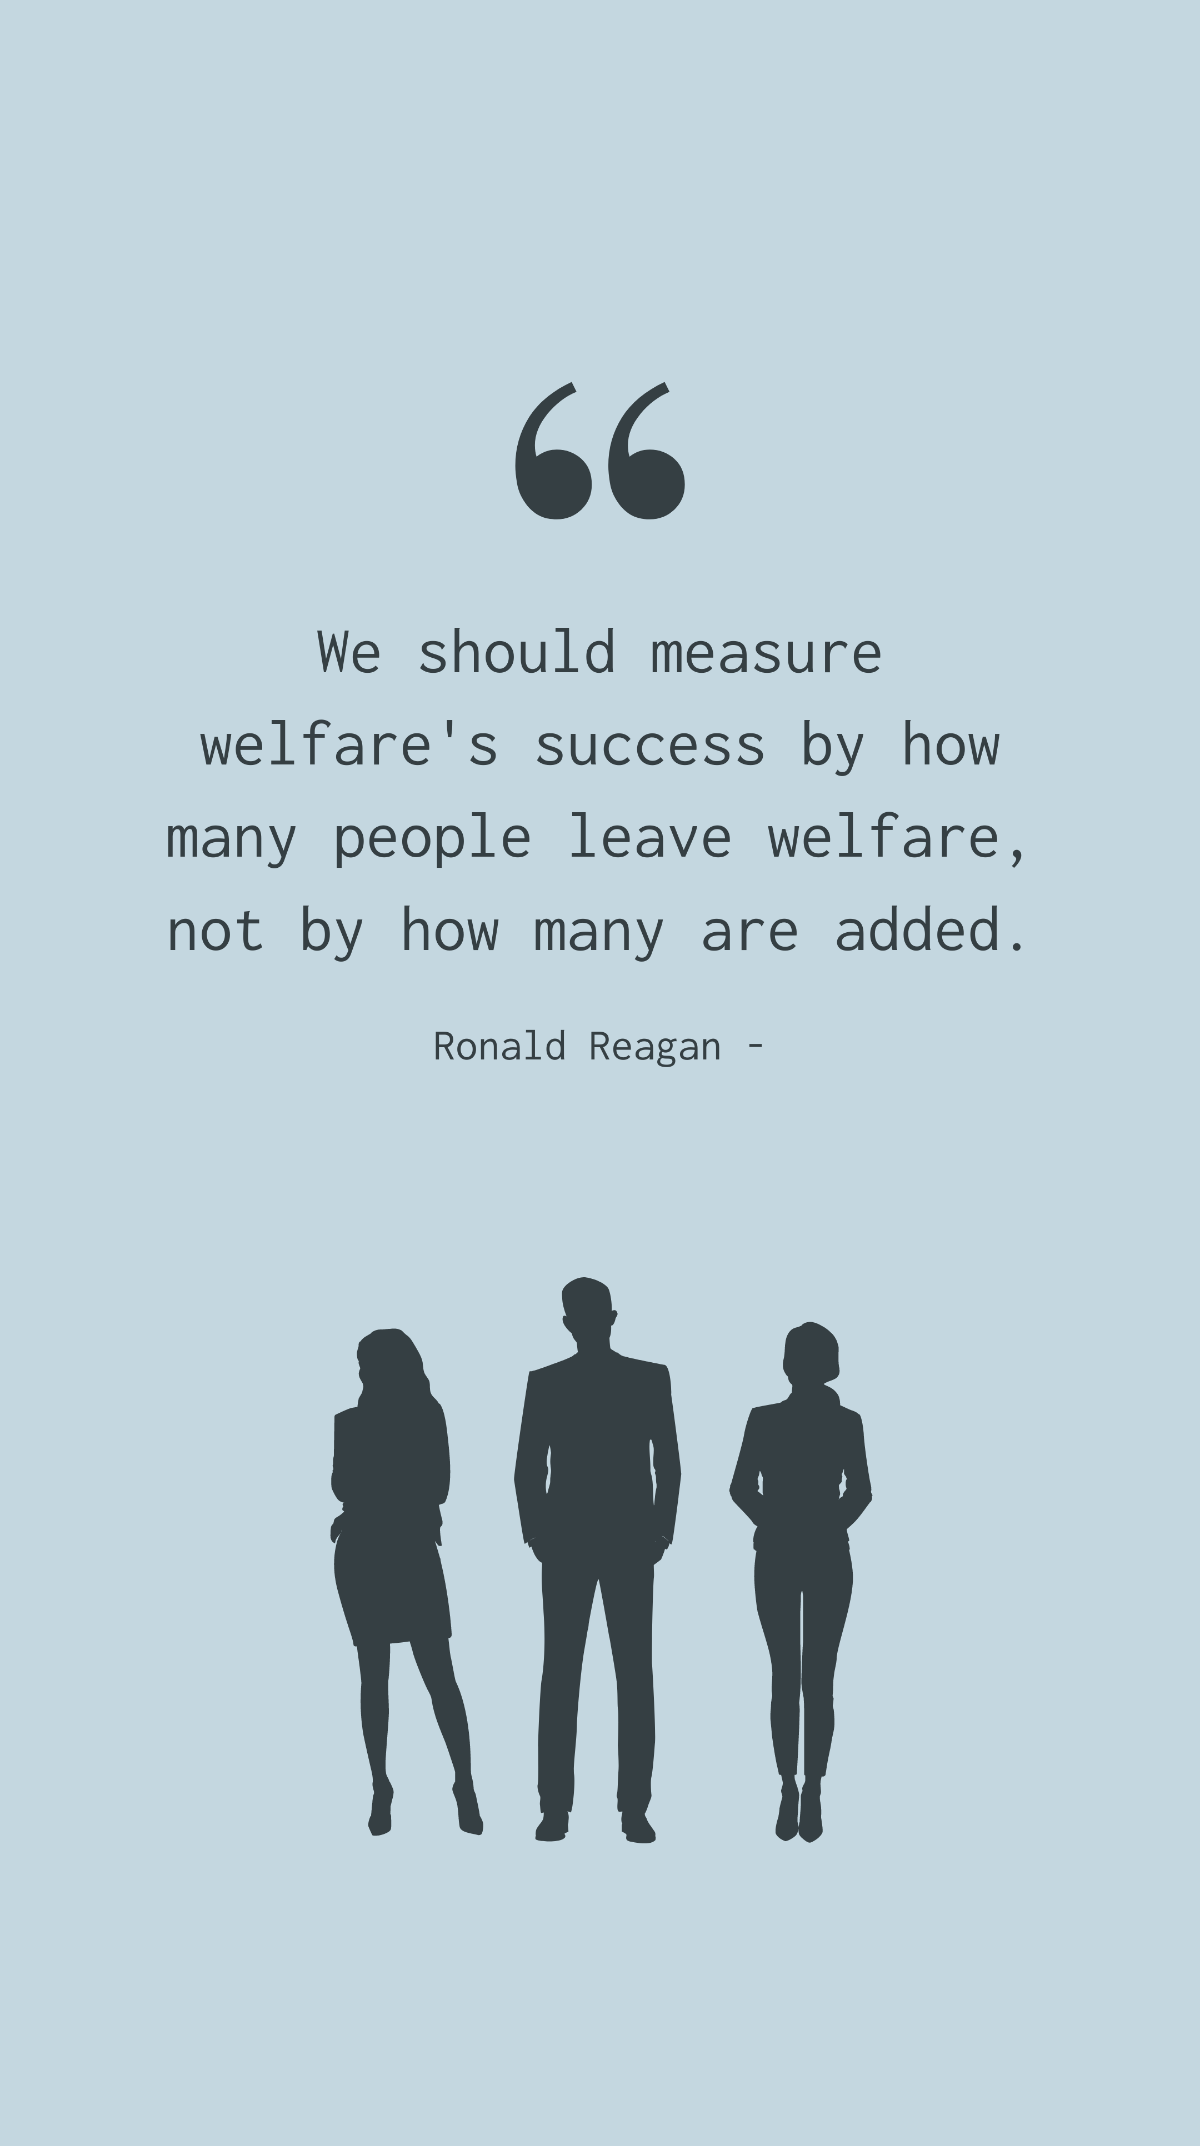 Ronald Reagan - We should measure welfare's success by how many people leave welfare, not by how many are added. Template